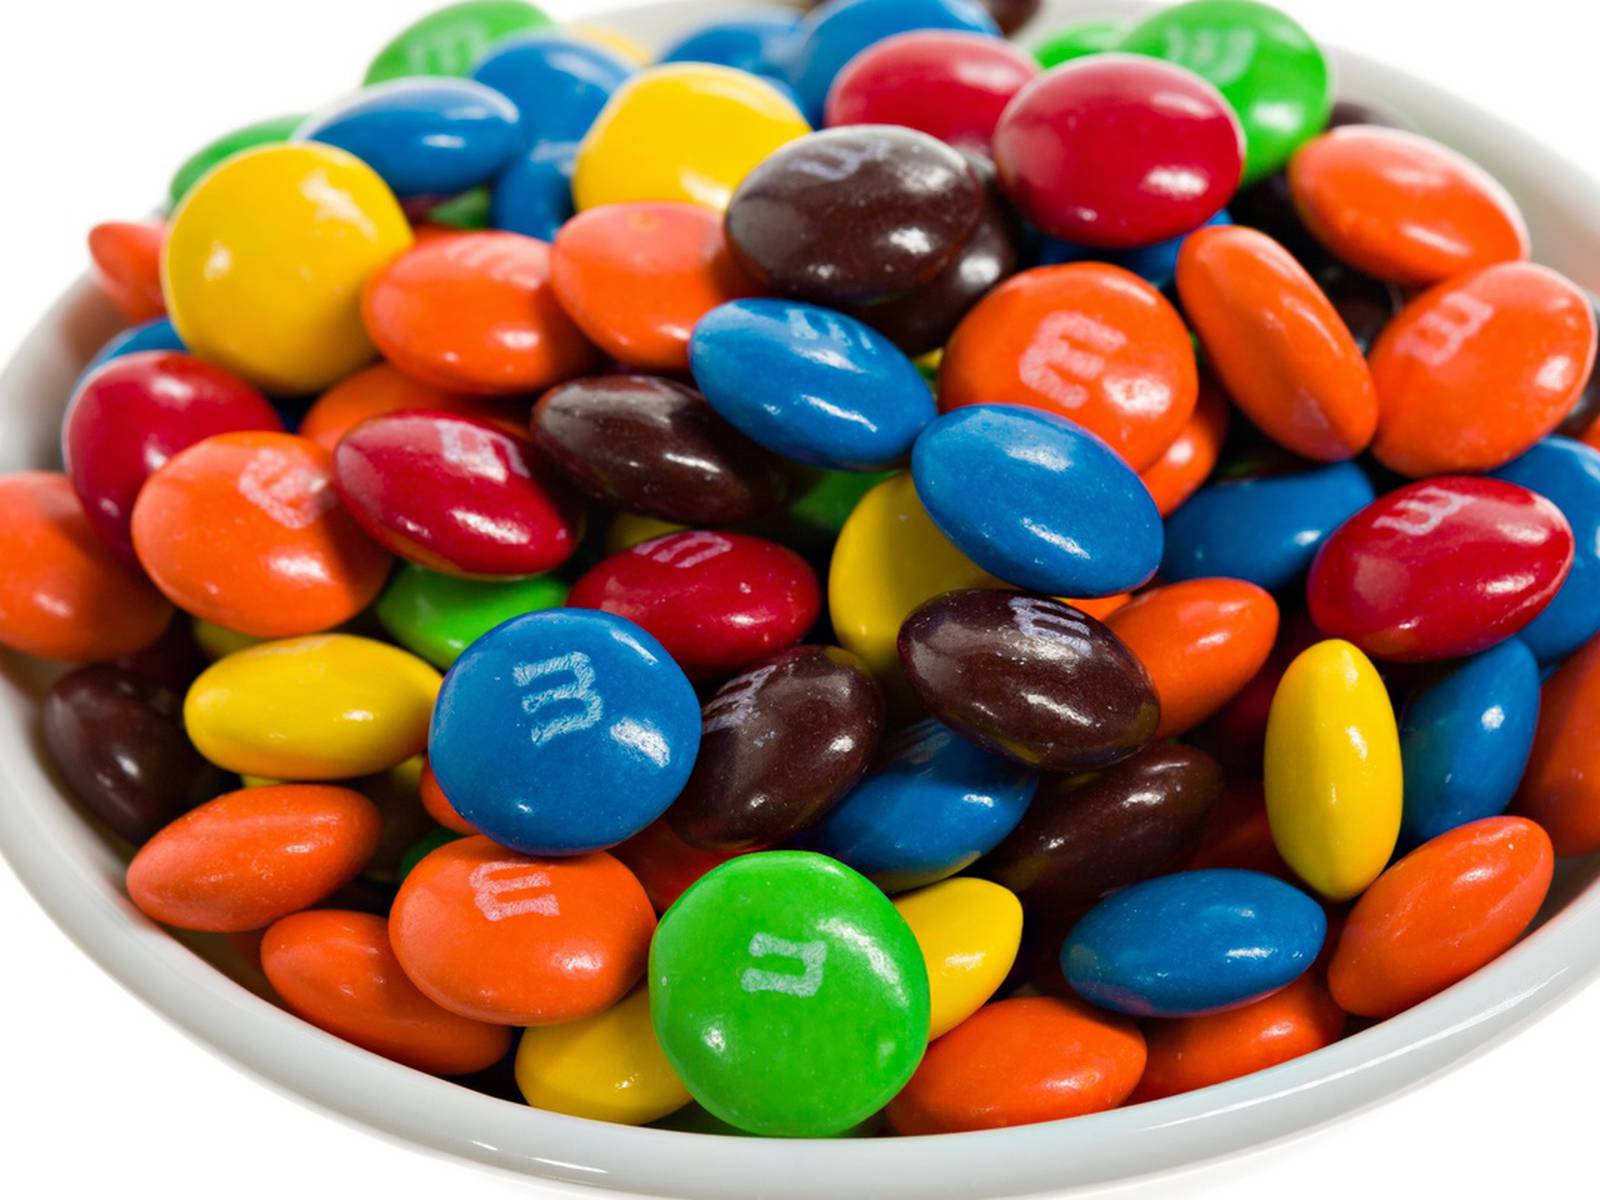 Mars M&m's Mix Ups Ratings - Mouths of Mums